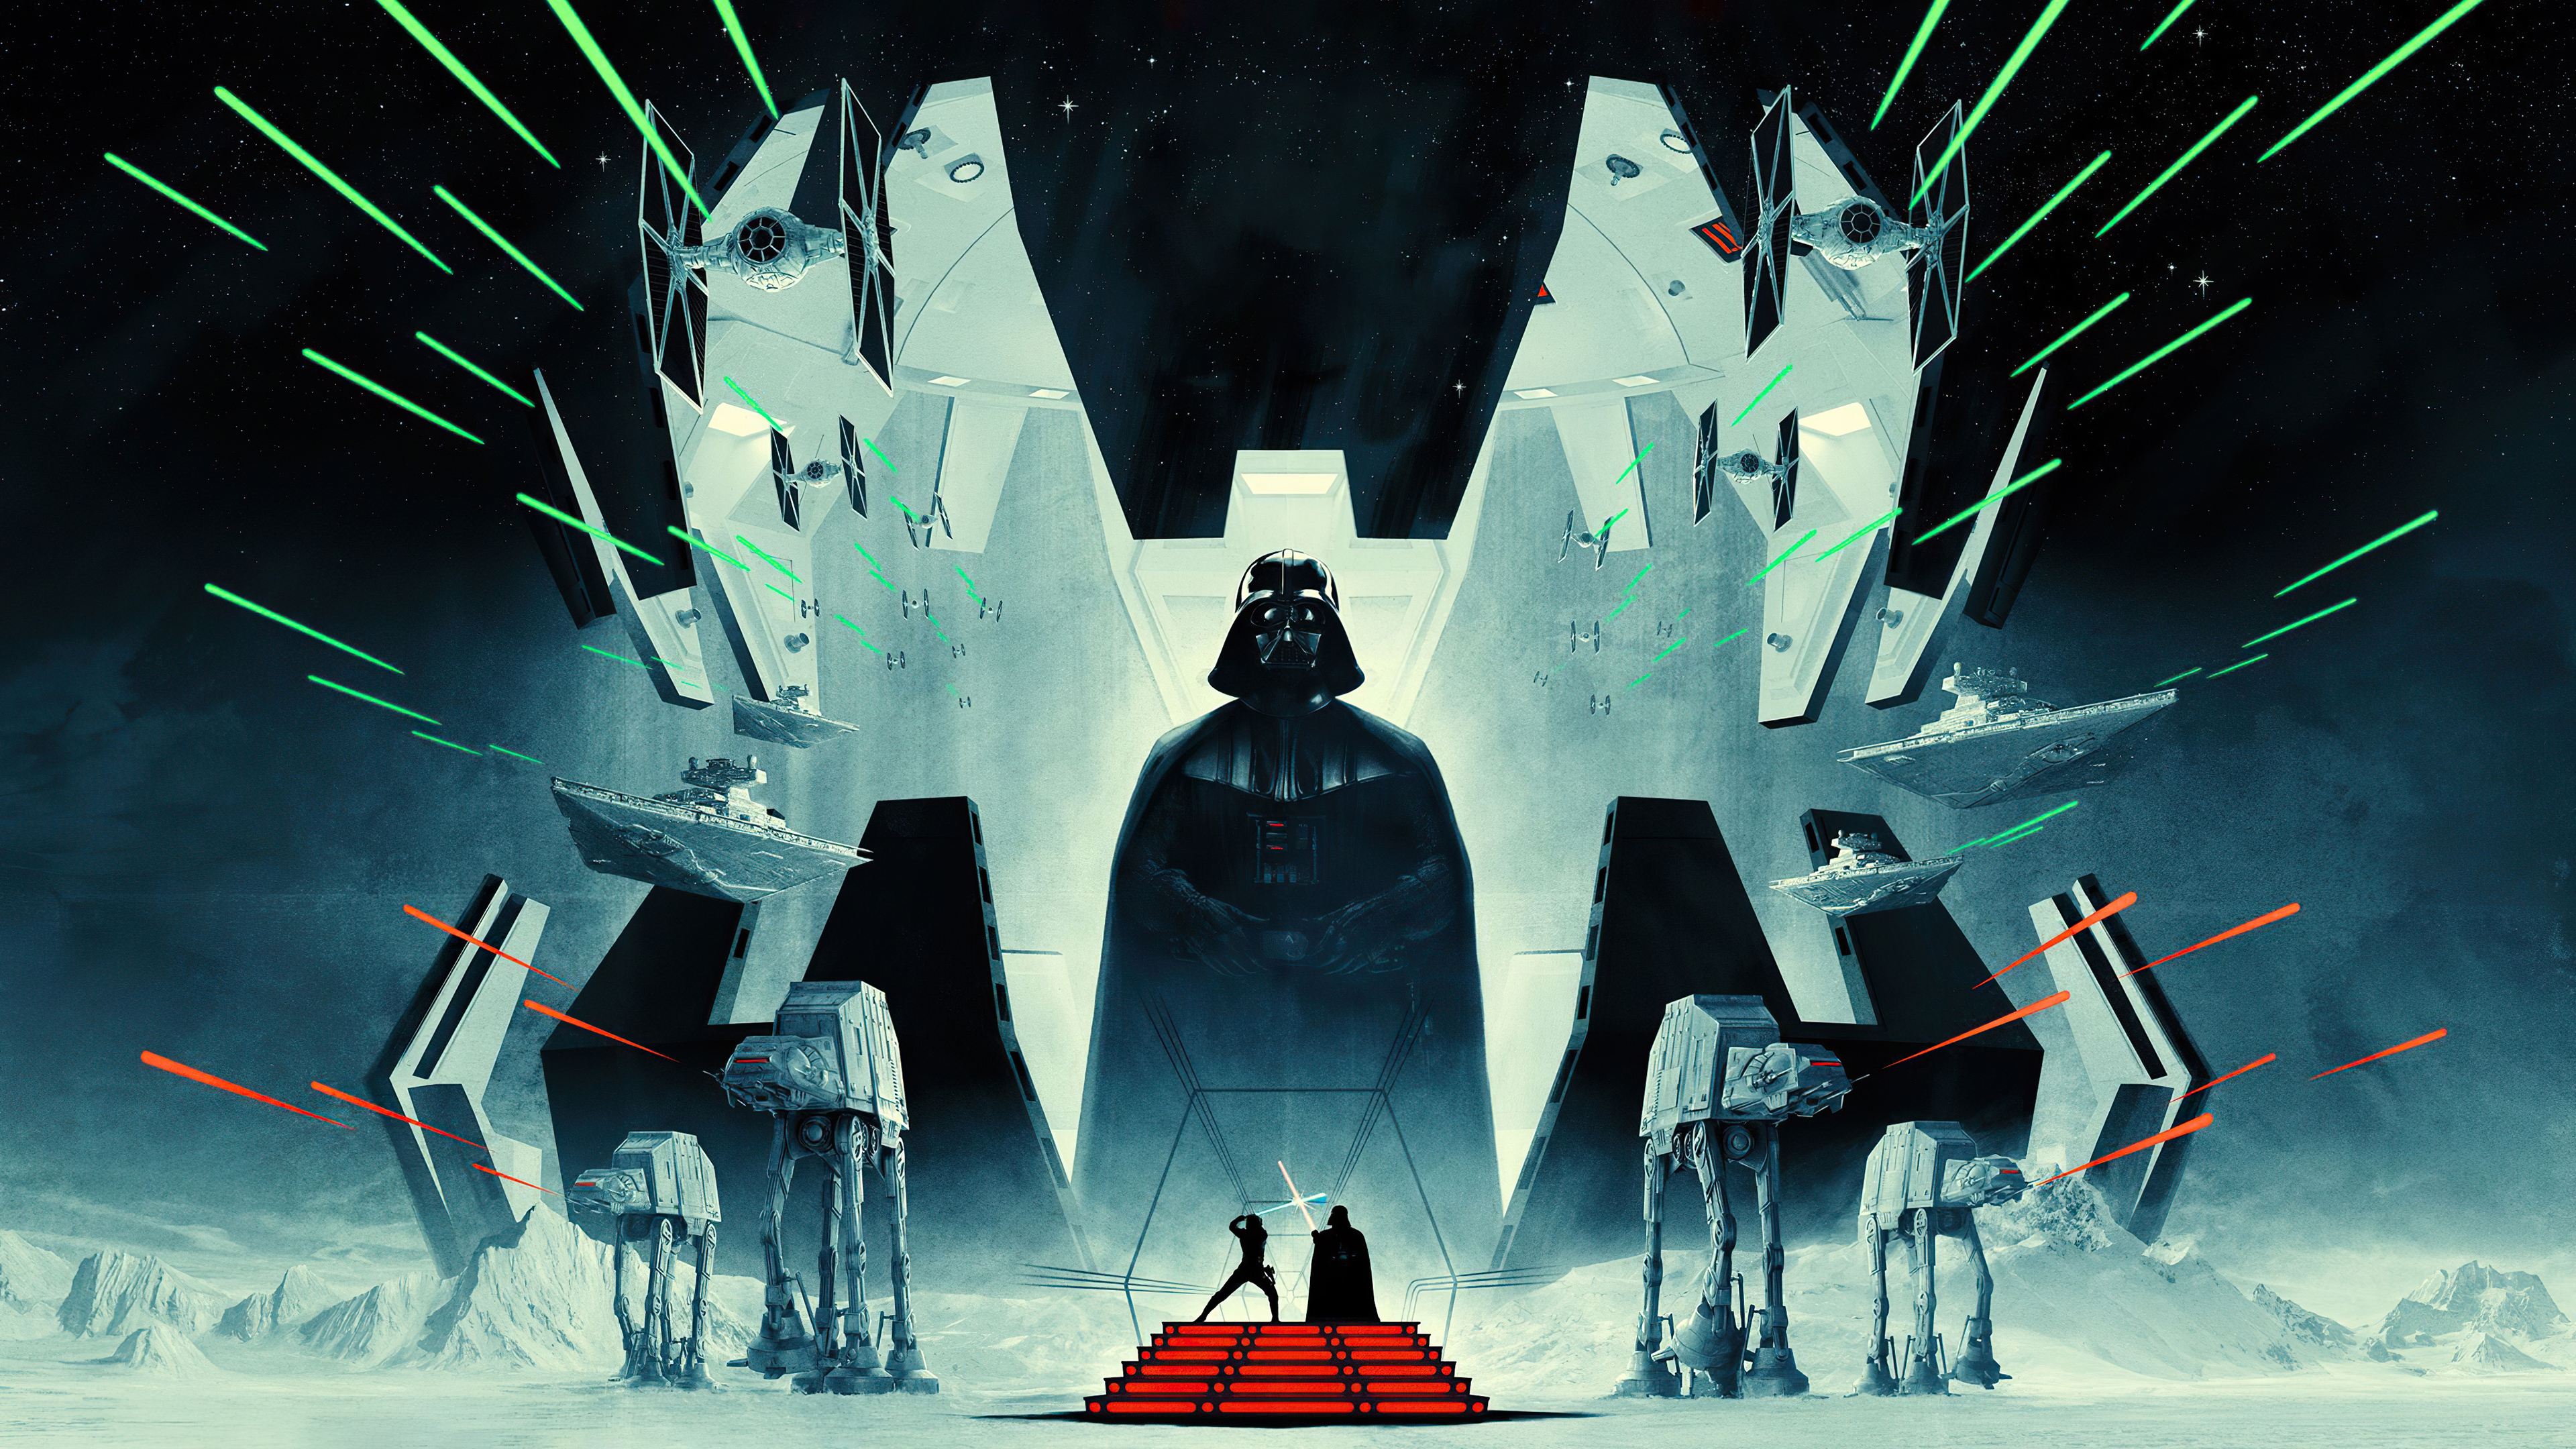 The Empire Strikes Back 1980 Phone Wallpaper  Moviemania  Star wars  poster Star wars pictures Star wars poster art